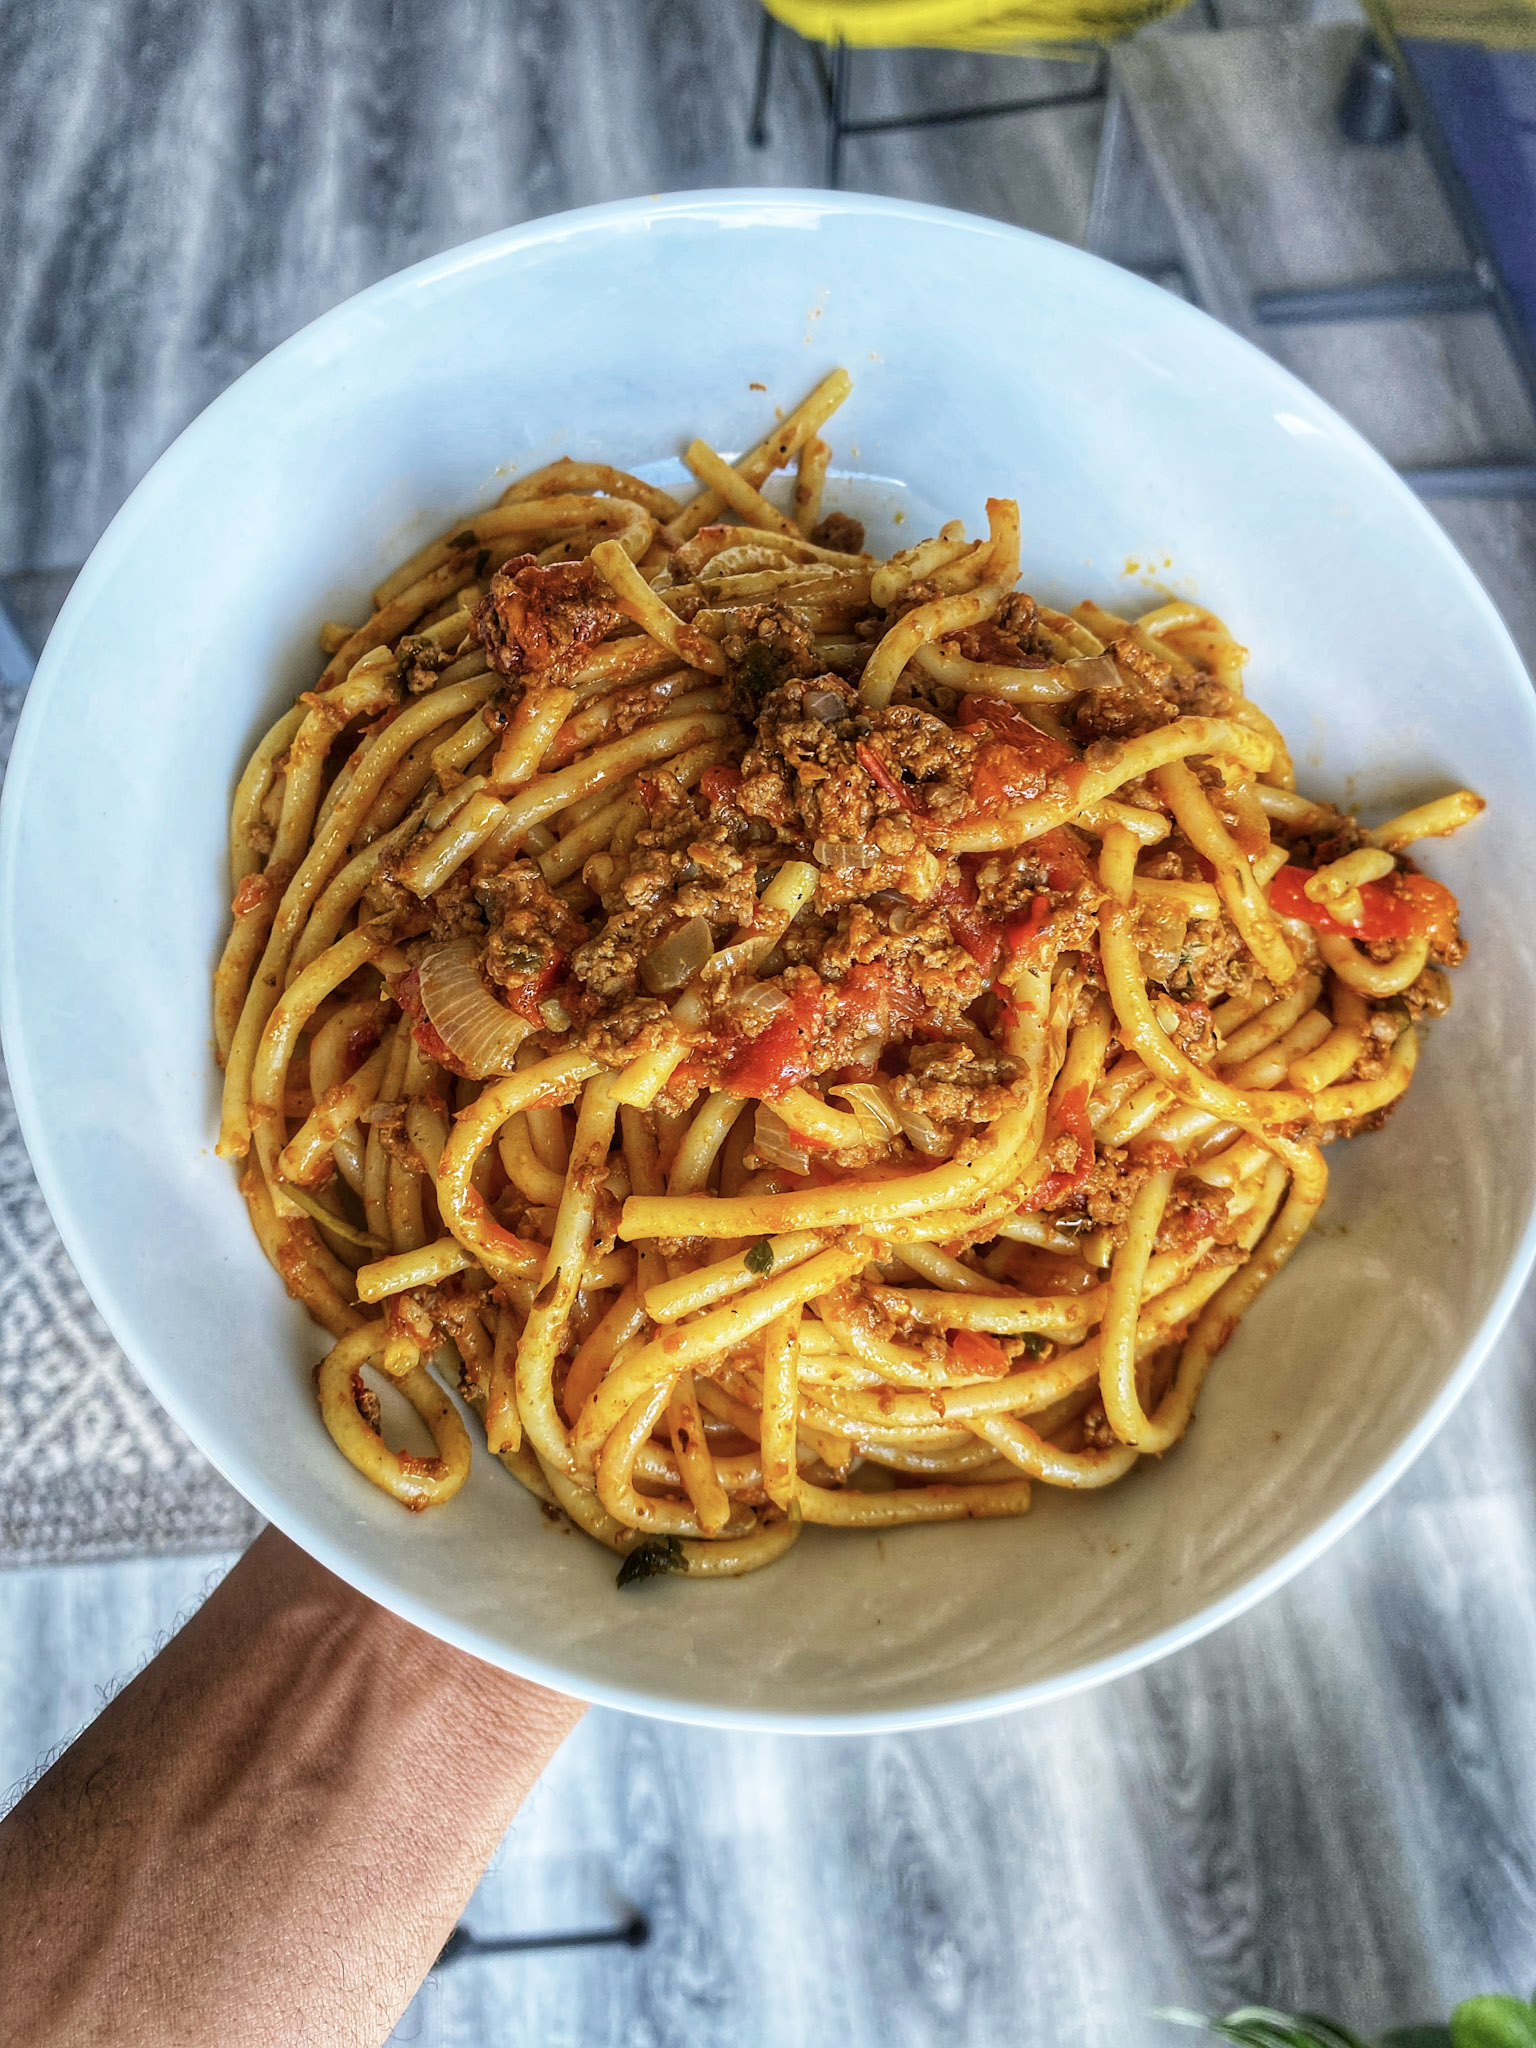 How to make the SIMPLEST spaghetti bolognese at home - Nigerianfoodiehub